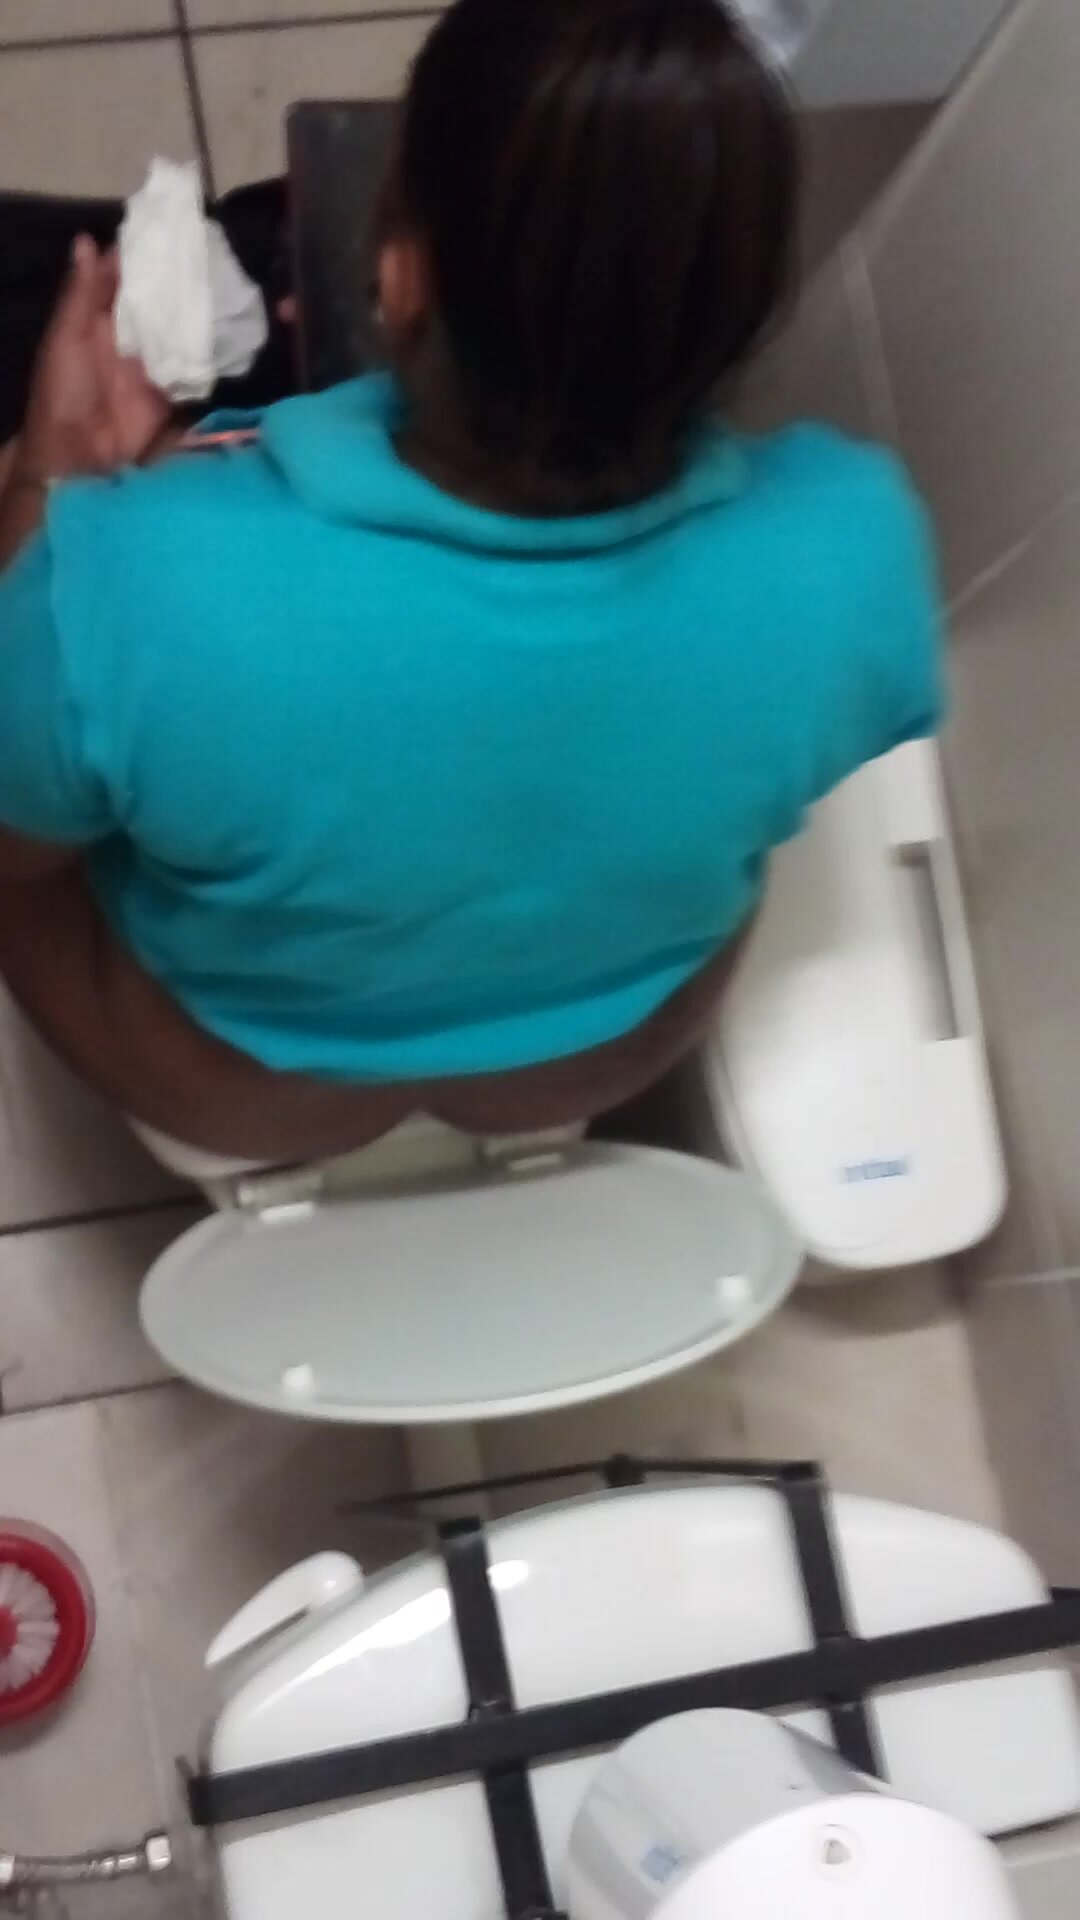 Filming a colleage from work peeing in the toilet